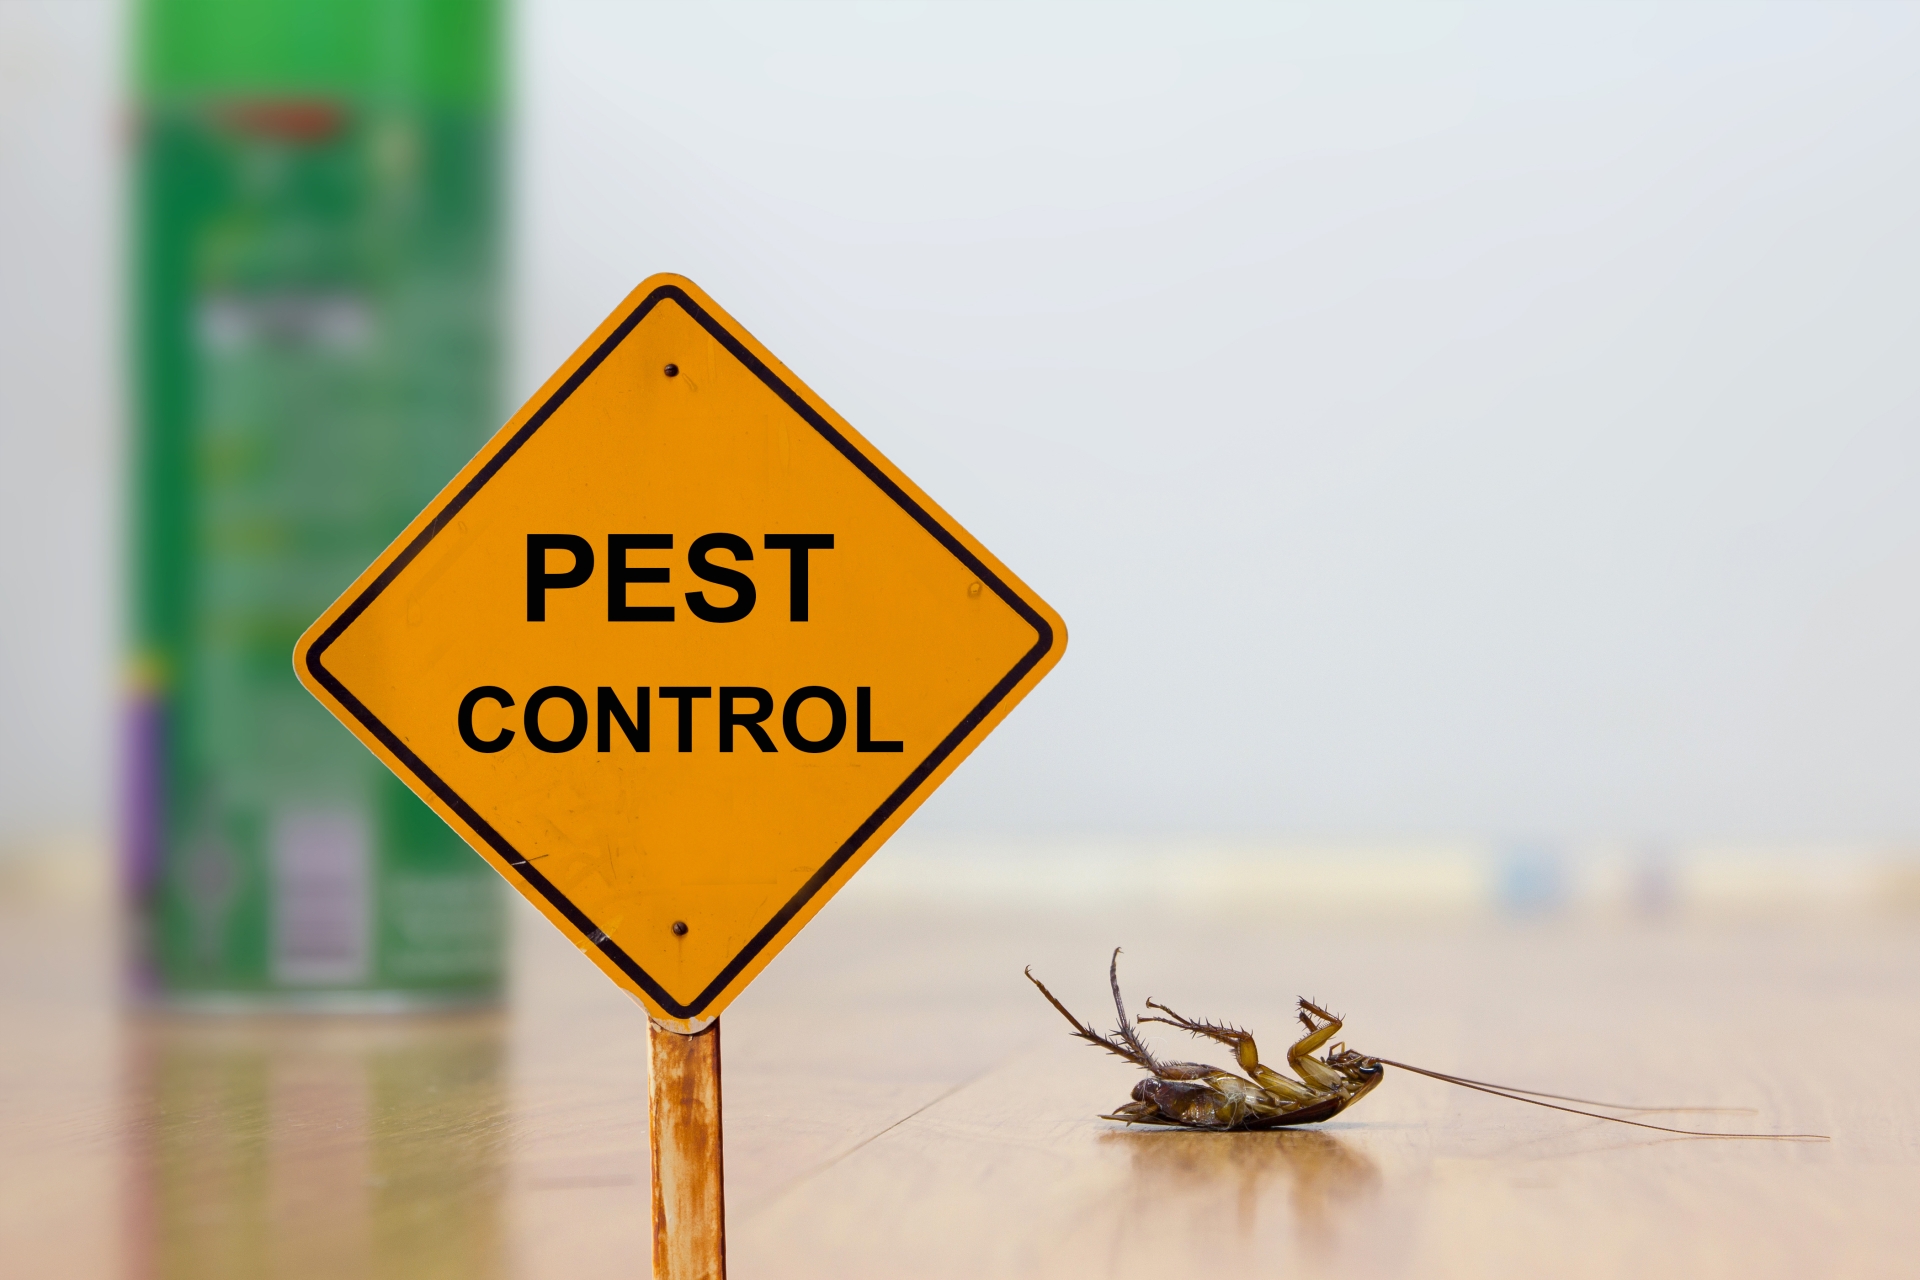 24 Hour Pest Control, Pest Control in Hanwell, W7. Call Now 020 8166 9746